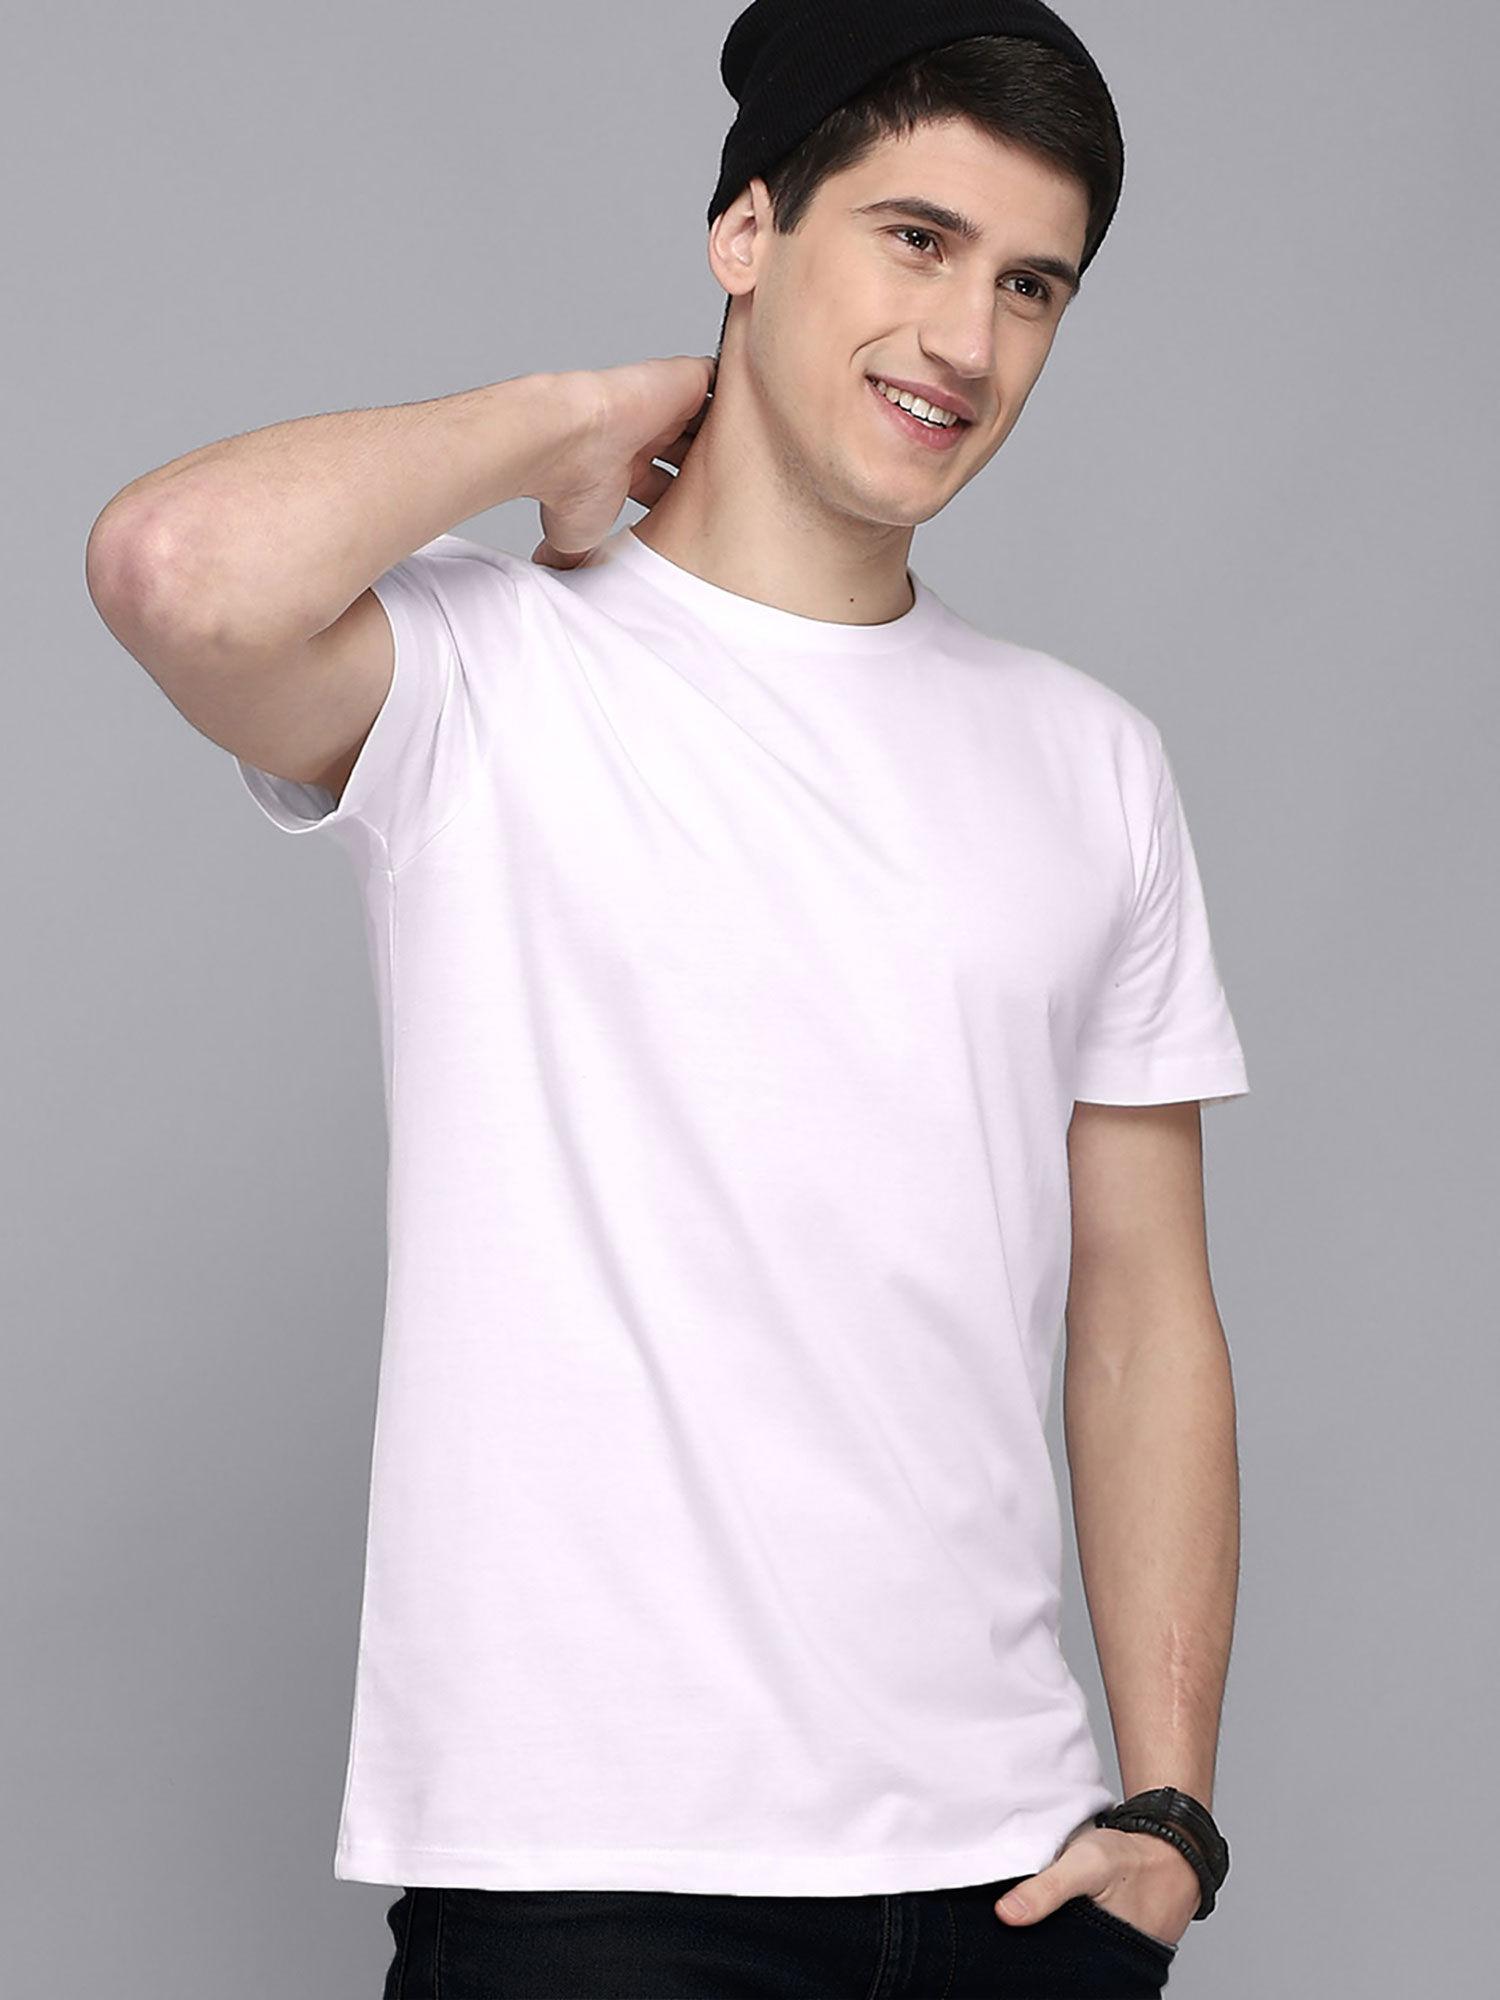 featured white half sleeve for young men